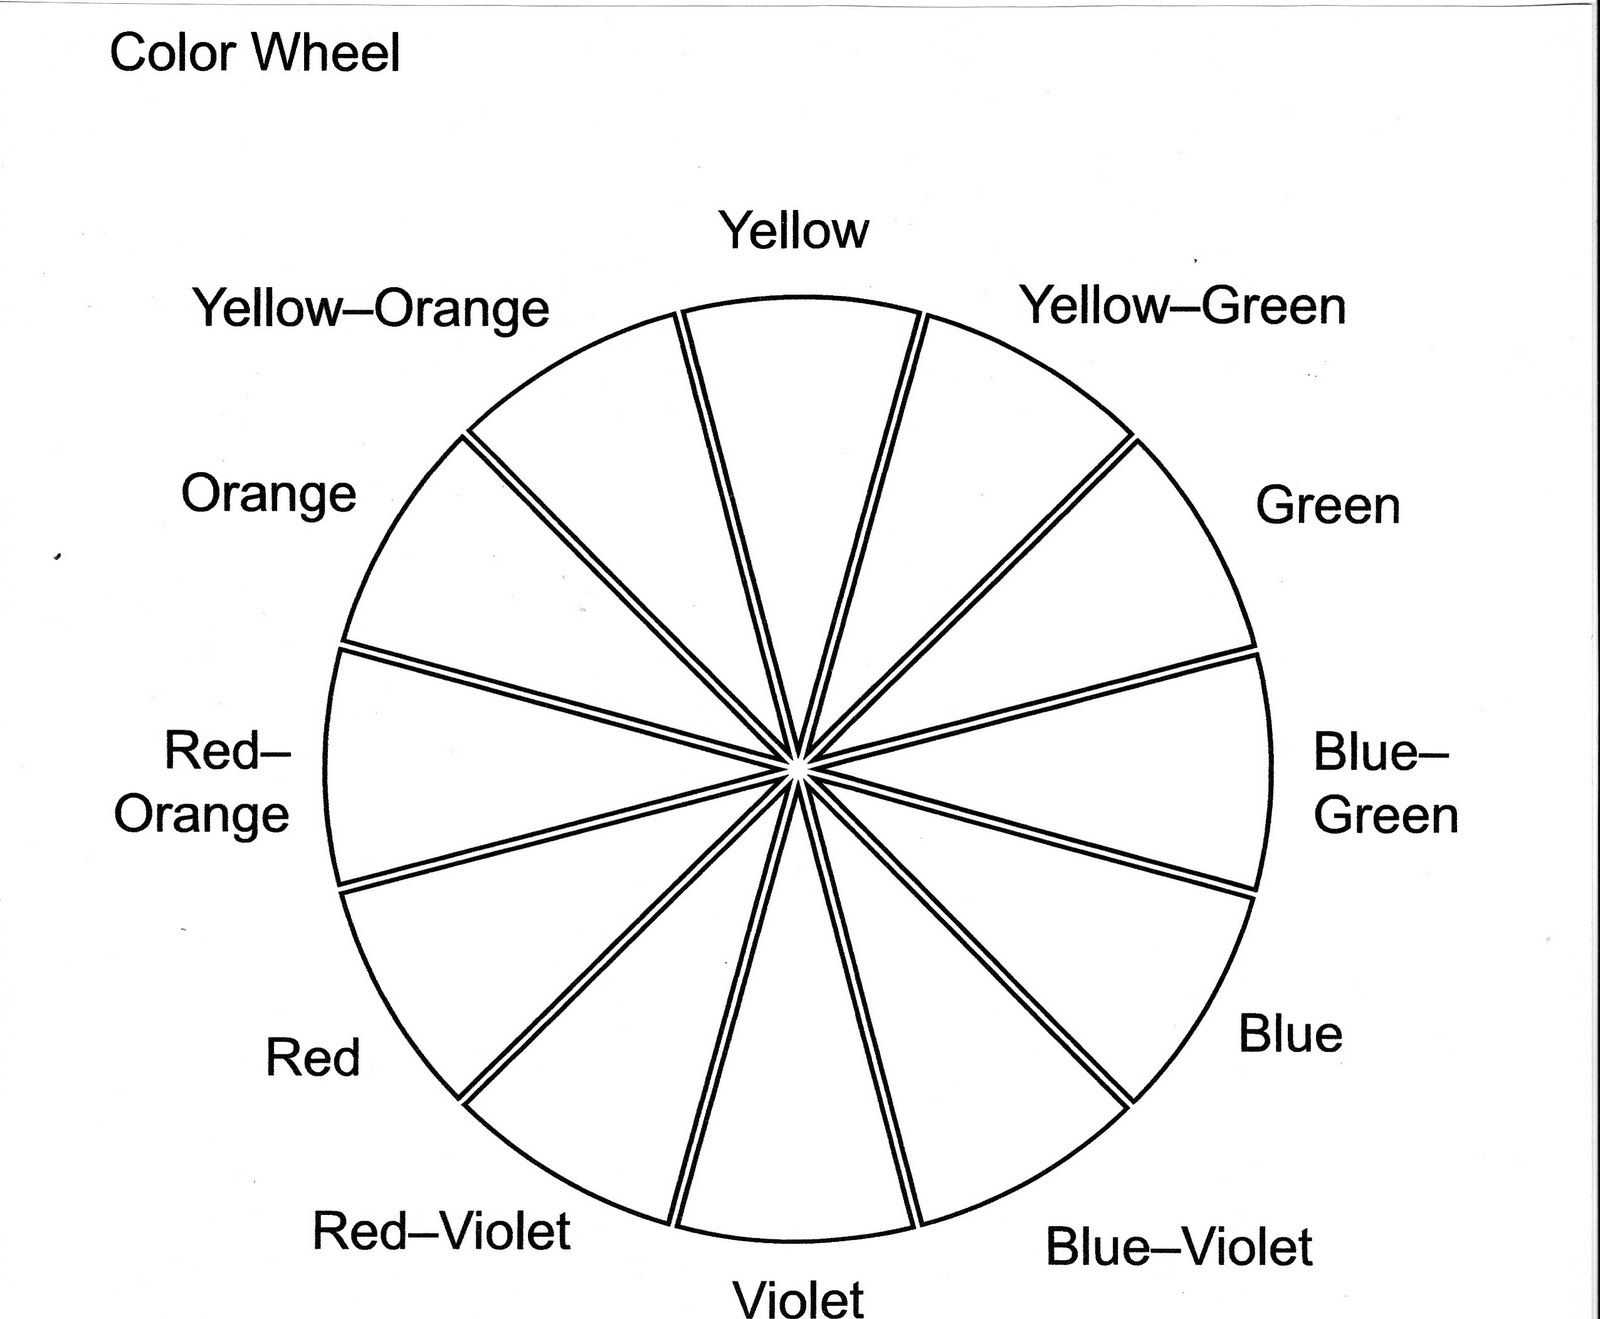 Color Wheel Worksheet Printable In 2019 | Color Wheel With Blank Color Wheel Template